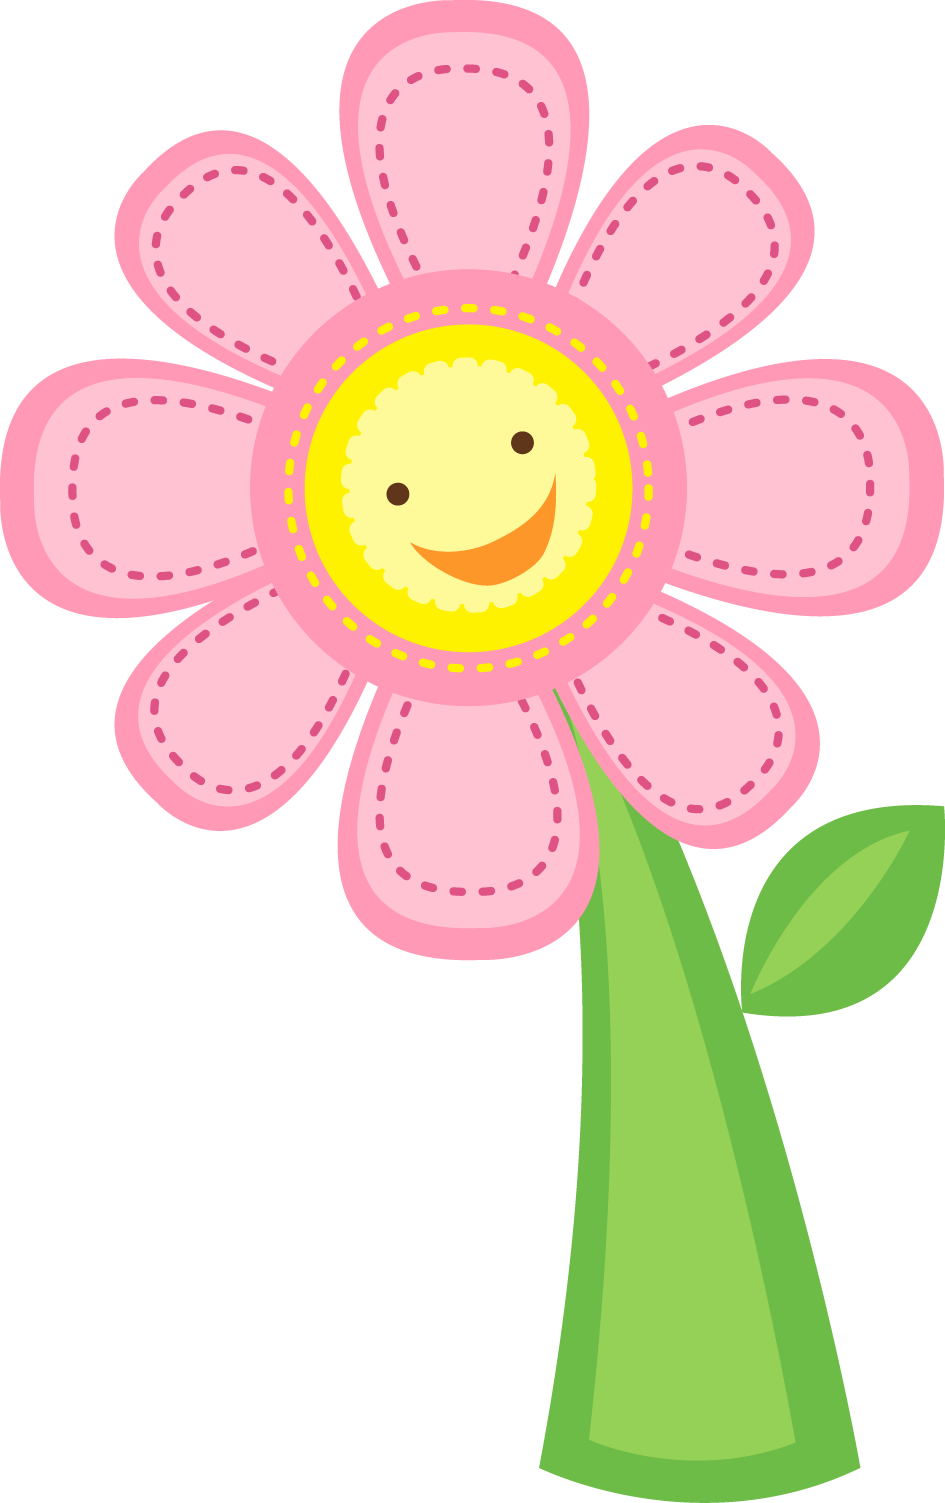 Flowers clipart smile. Pin by marina on